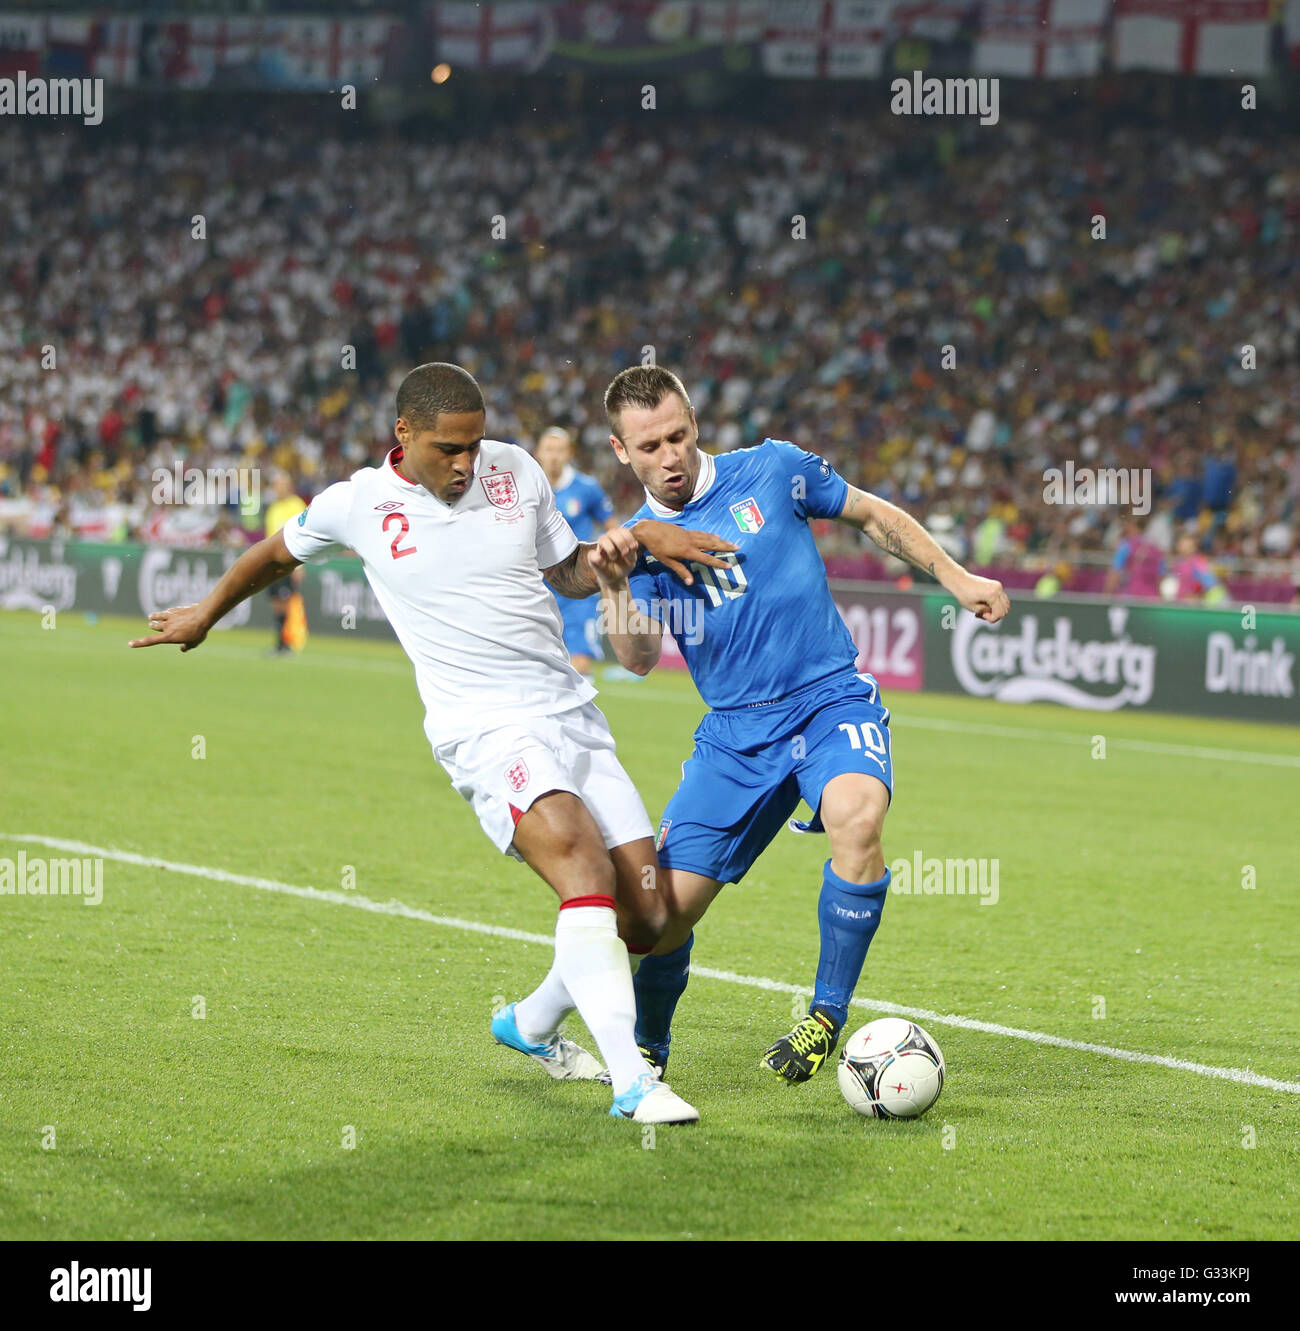 KYIV, UKRAINE - JUNE 24, 2012: Glen Johnson of England (L) fights for a ball with Antonio Cassano of Italy during their UEFA EURO 2012 Quarter-final game at Olympic stadium in Kyiv, Ukraine Stock Photo